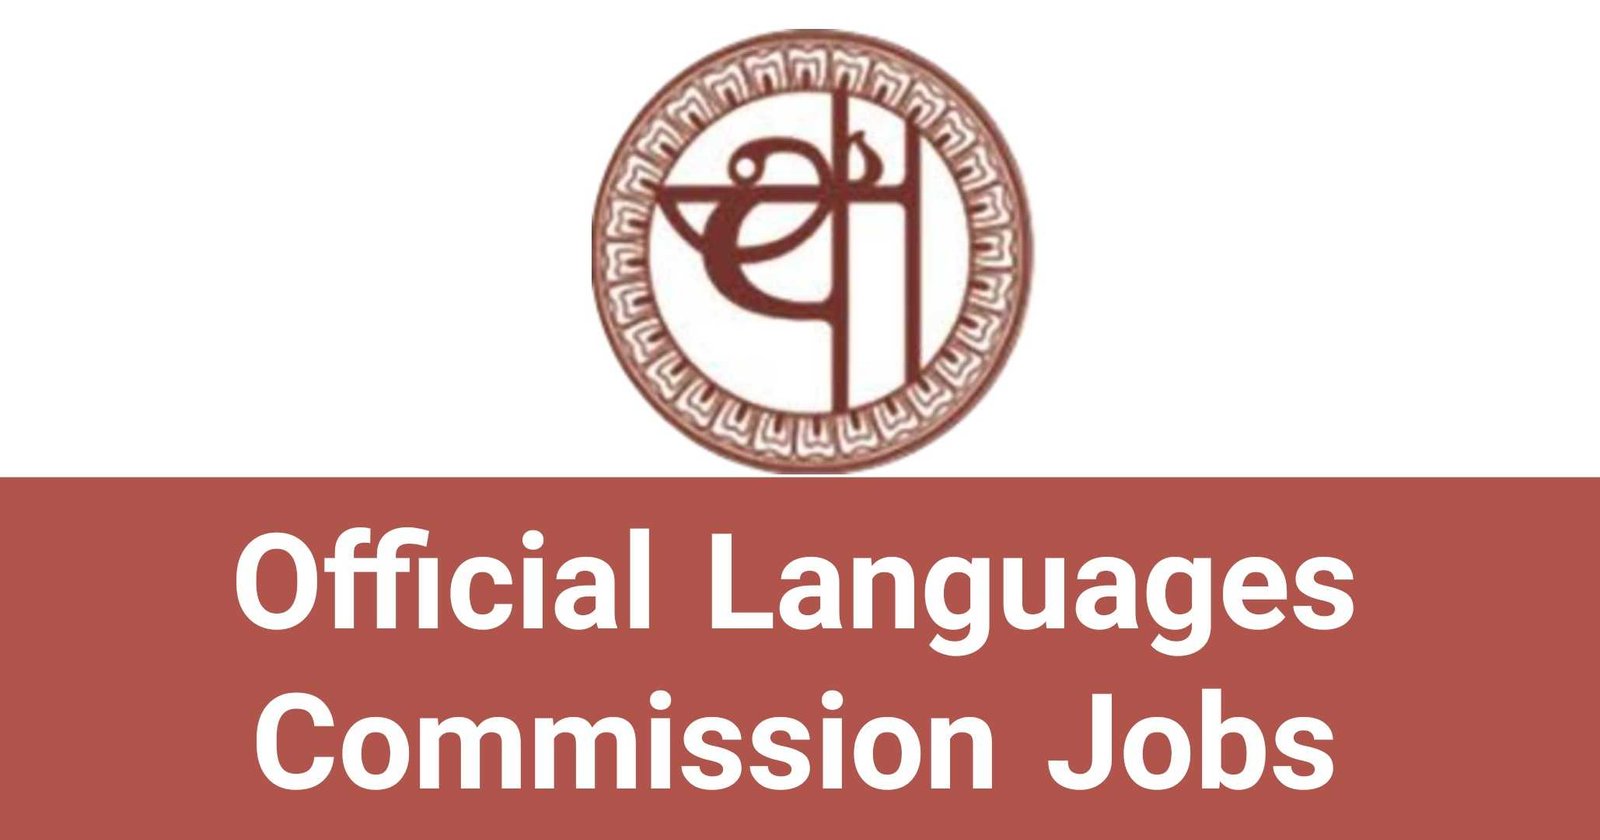 Official Languages Commission Jobs Vacancies Careers